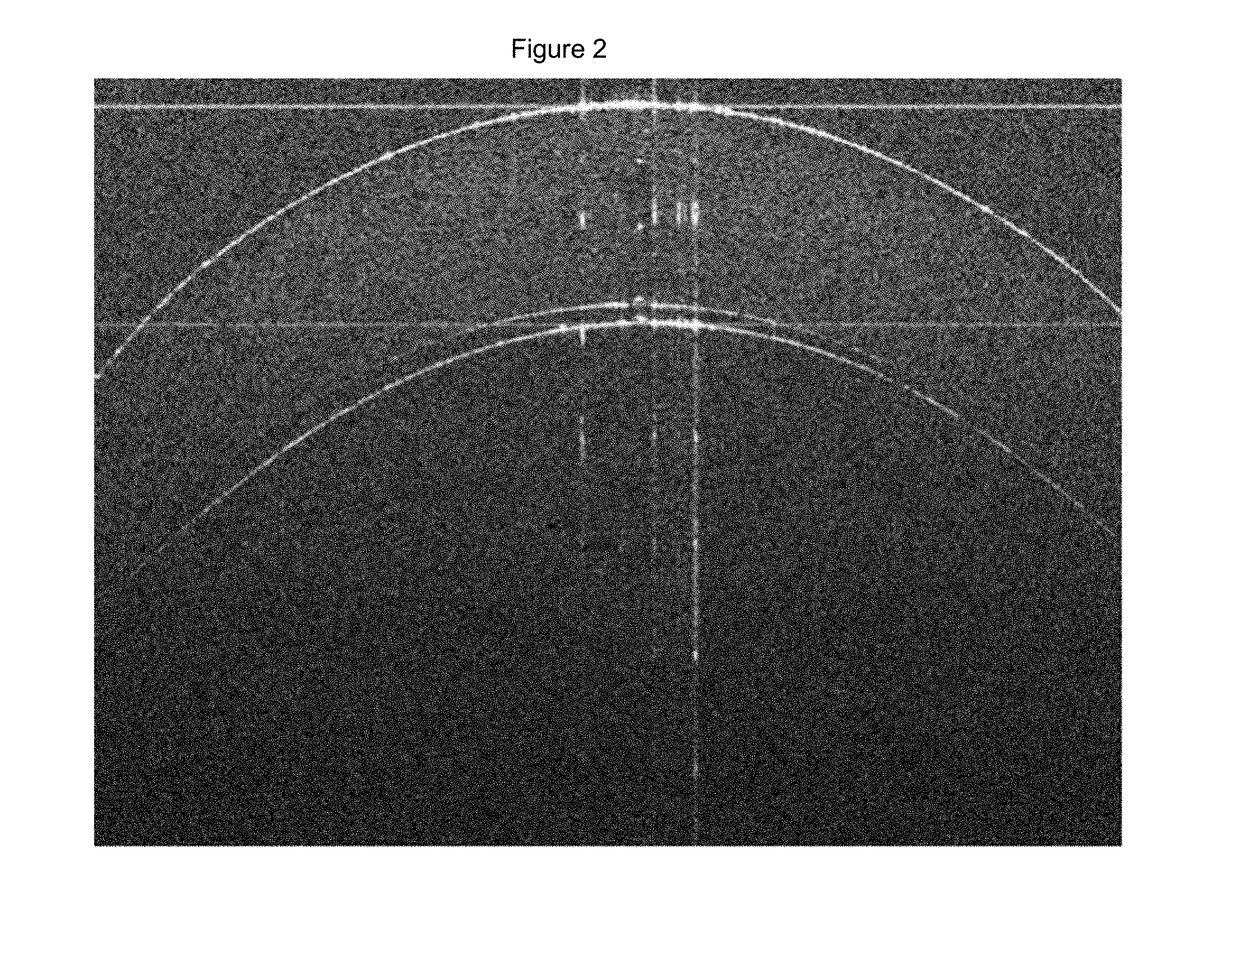 Increased stiffness center optic in soft contact lenses for astigmatism correction